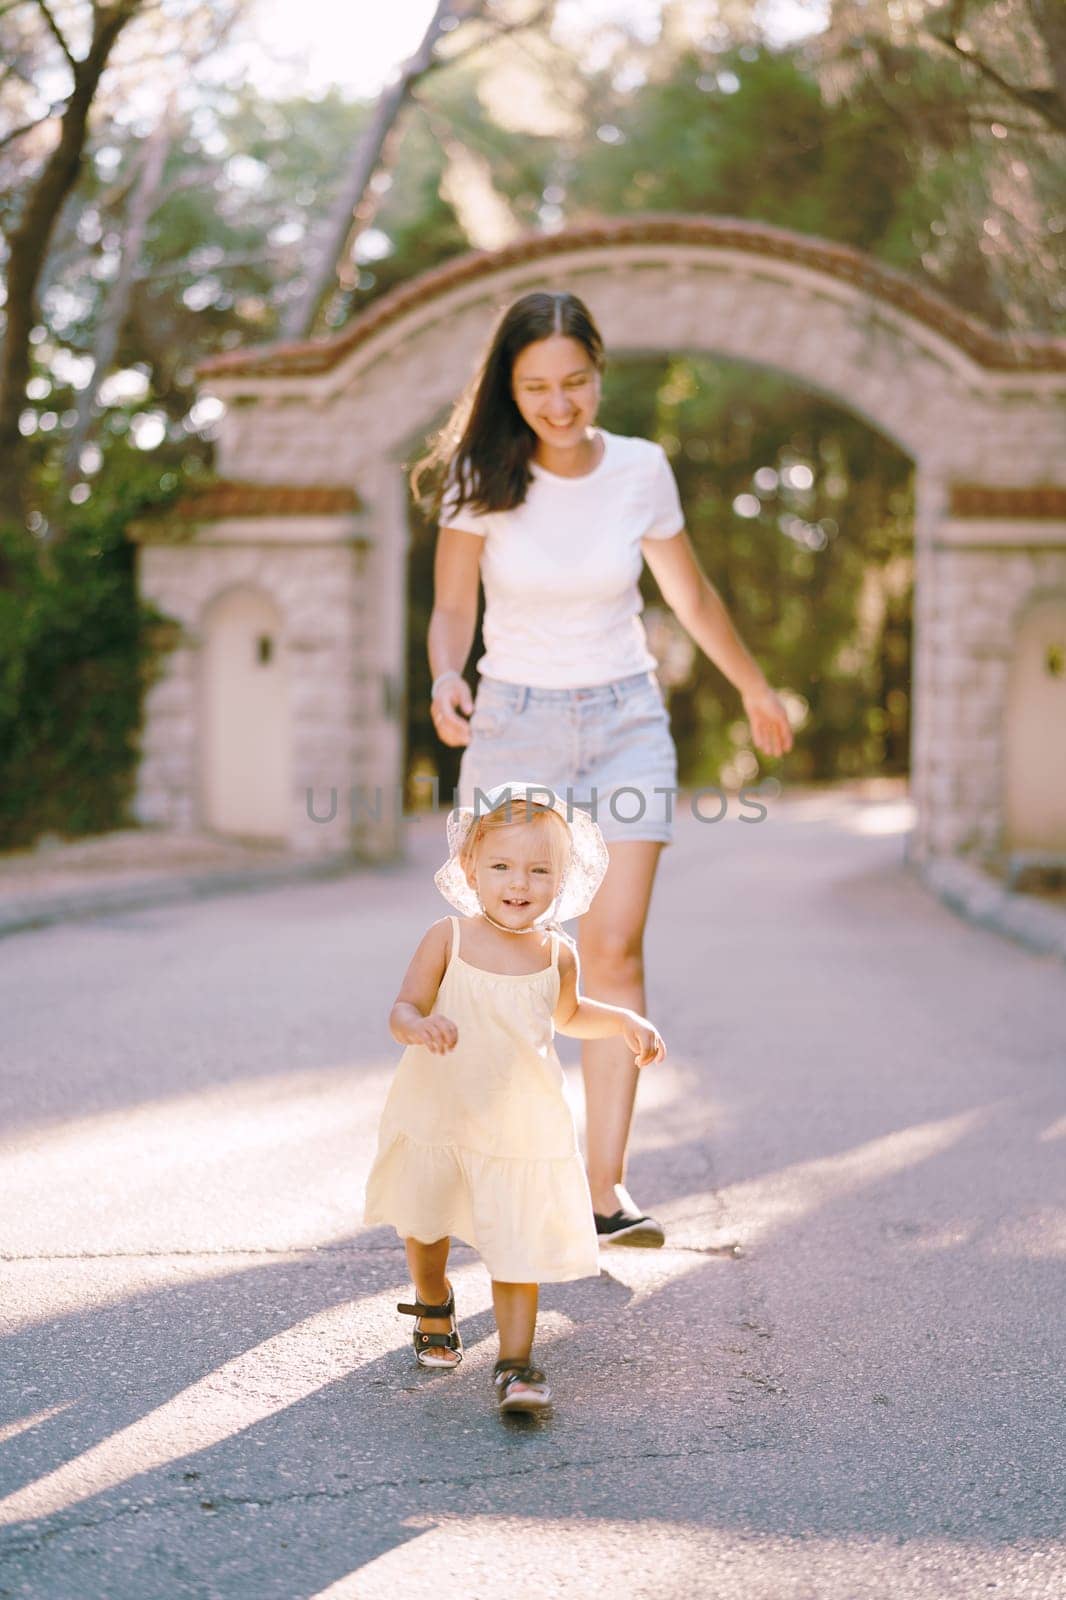 Smiling mother following her little girl along the road in the park. High quality photo